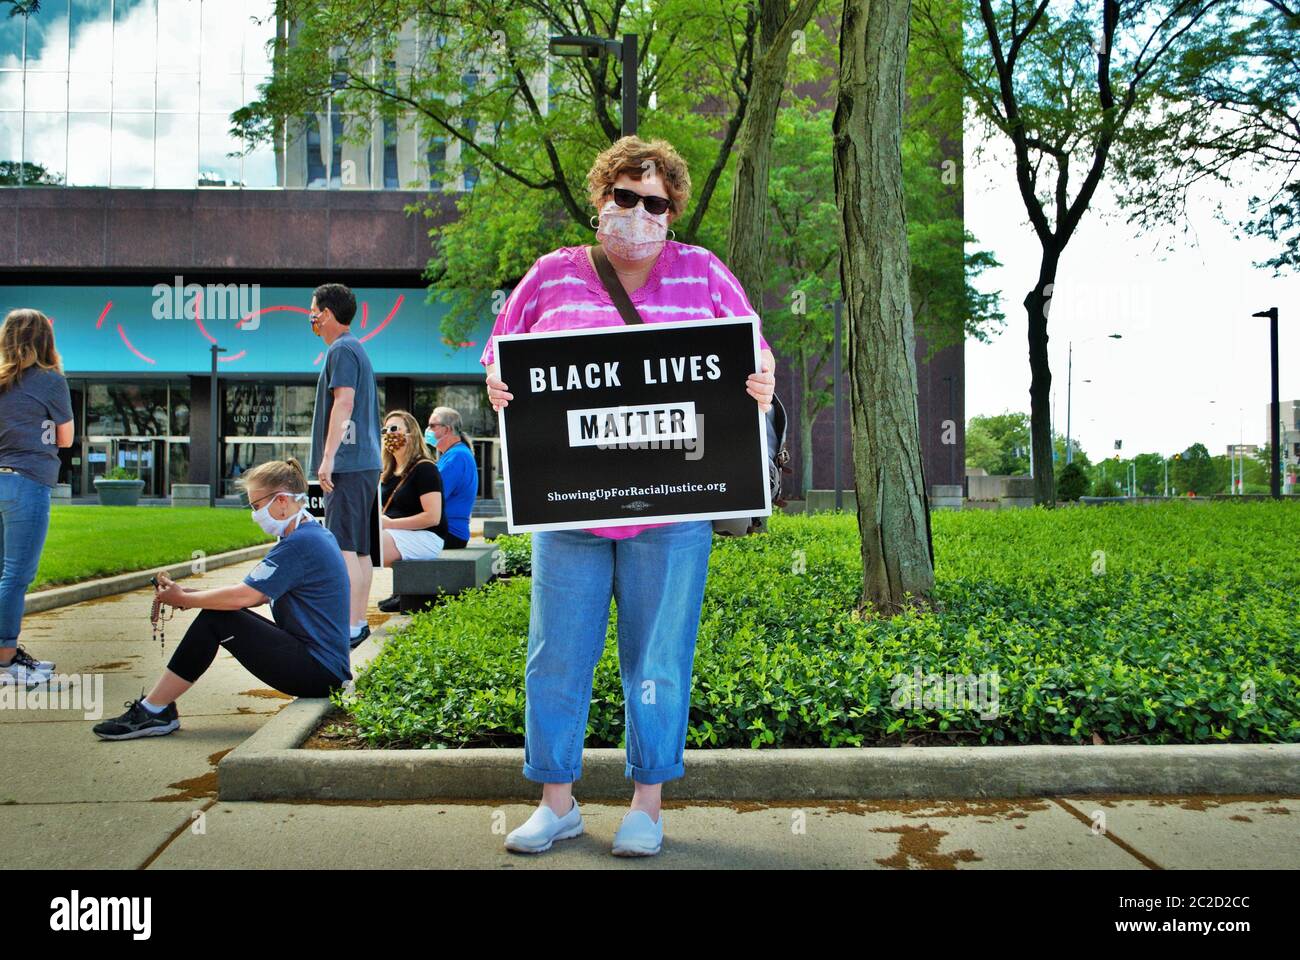 Dayton, Ohio, United States 30/05/2020 protesters at a lack lives matter rally holding signs and wearing masks Stock Photo